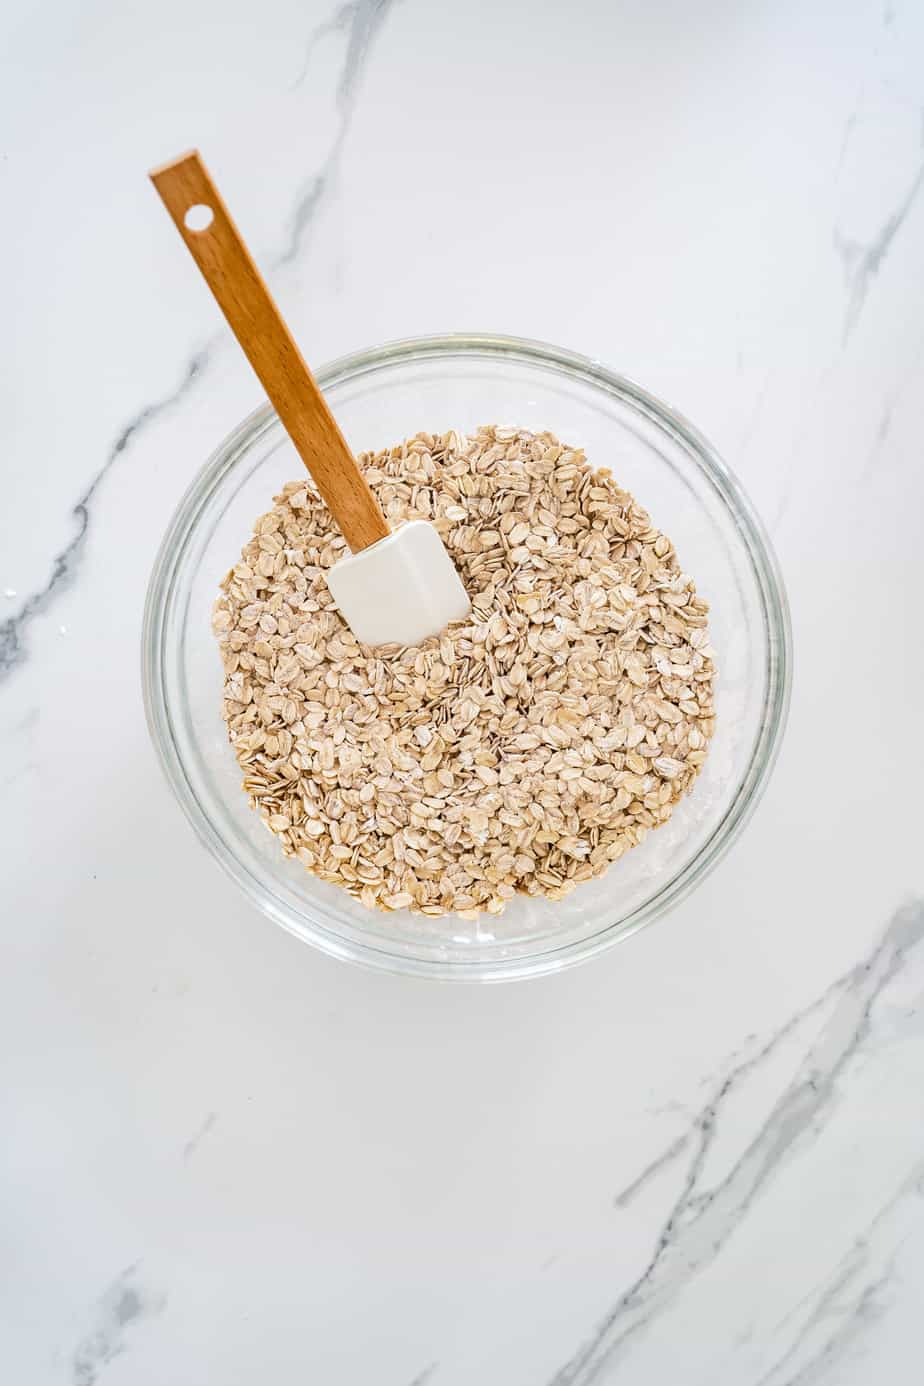 A mixing bowl with rolled oats and a spatula.